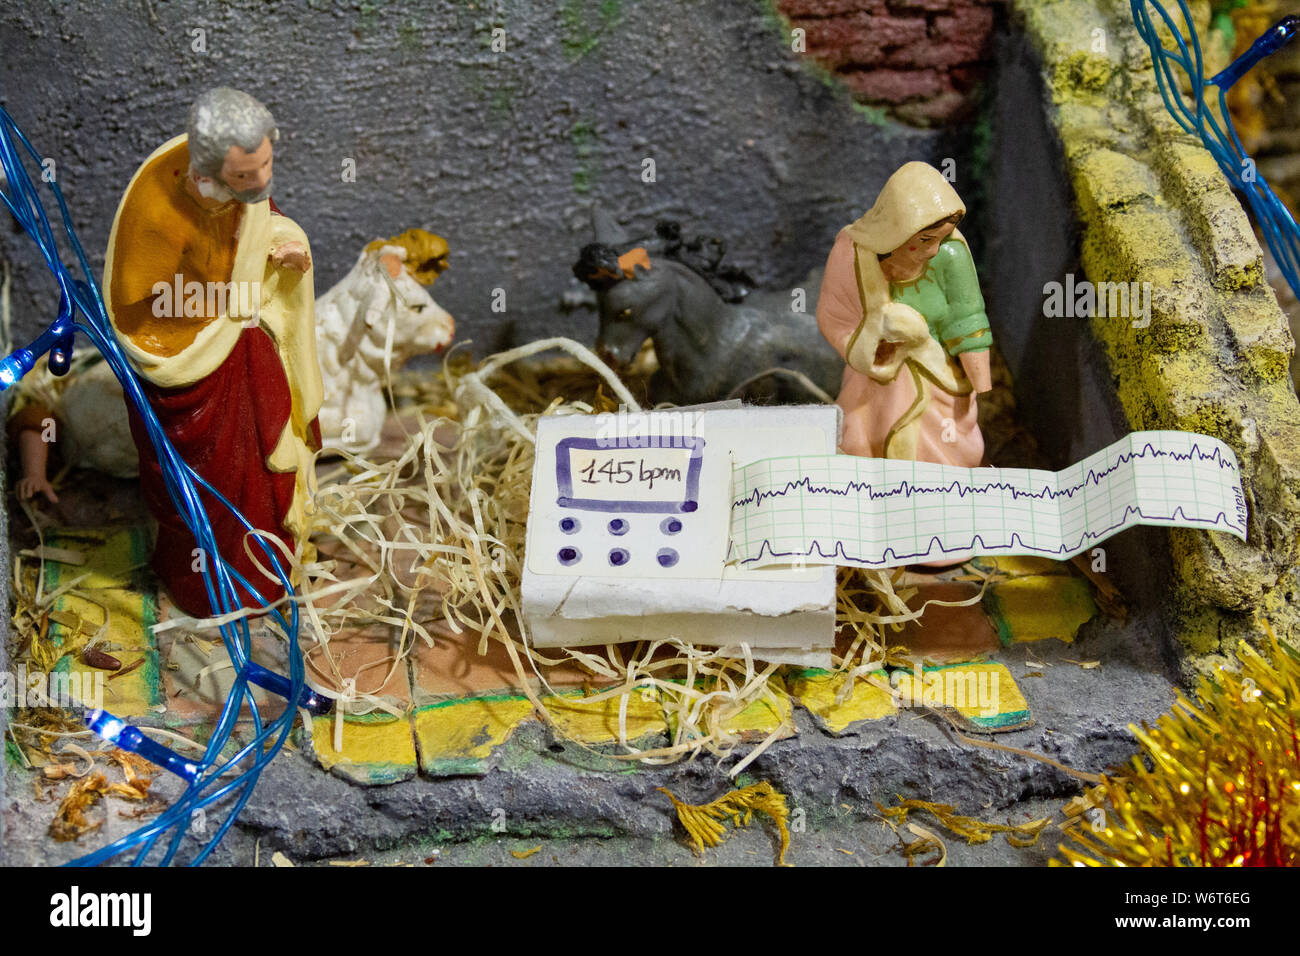 Nativity scene during Advent with cardiotocograph/electronic fetal monitor (EFM) instead of Baby Jesus. Stock Photo